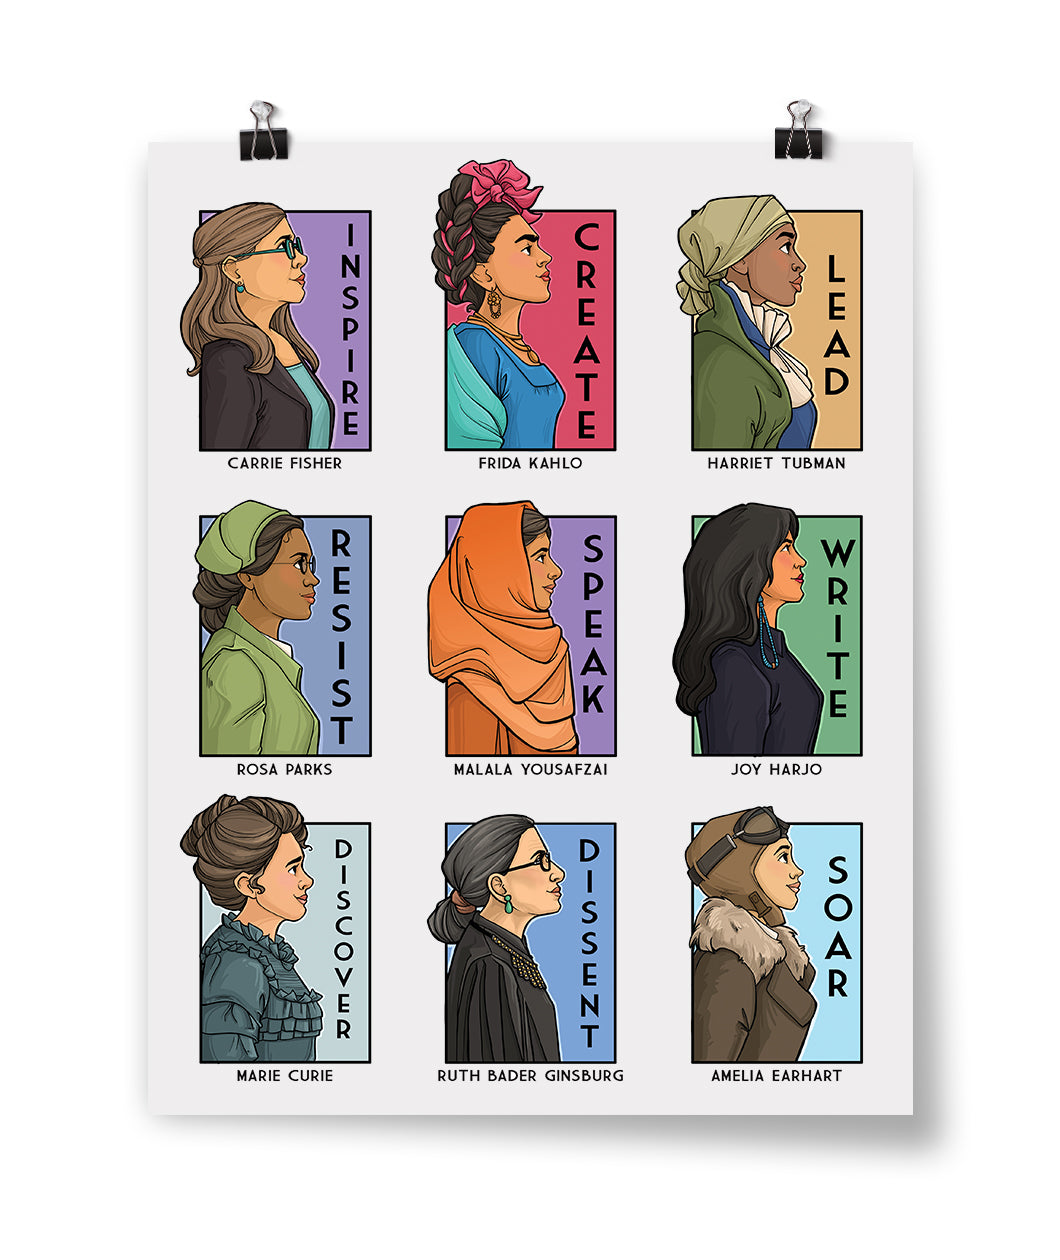 The Real Women poster from Karen Hallion depicts a grid of nine profiles of influential women each with a word written next to them.